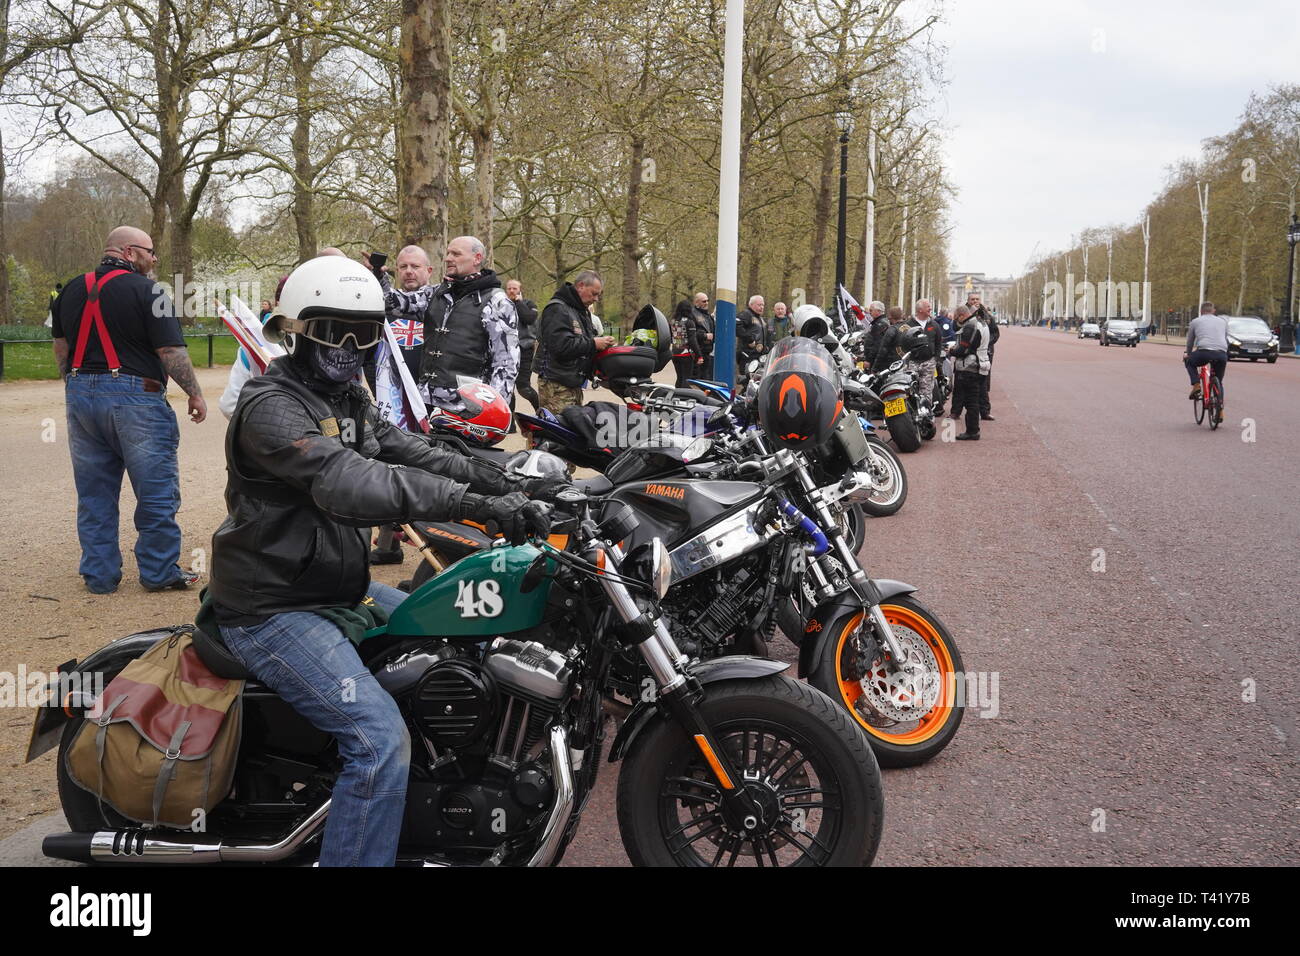 Thousands of bikers rode through London in support of Solider F who is facing prosecution for acts that took place in Northern Ireland in 1972.  The ride began at Hyde Park corner and travelled across Vauxhal Bridge along the embankment and to Parliament Square. Stock Photo